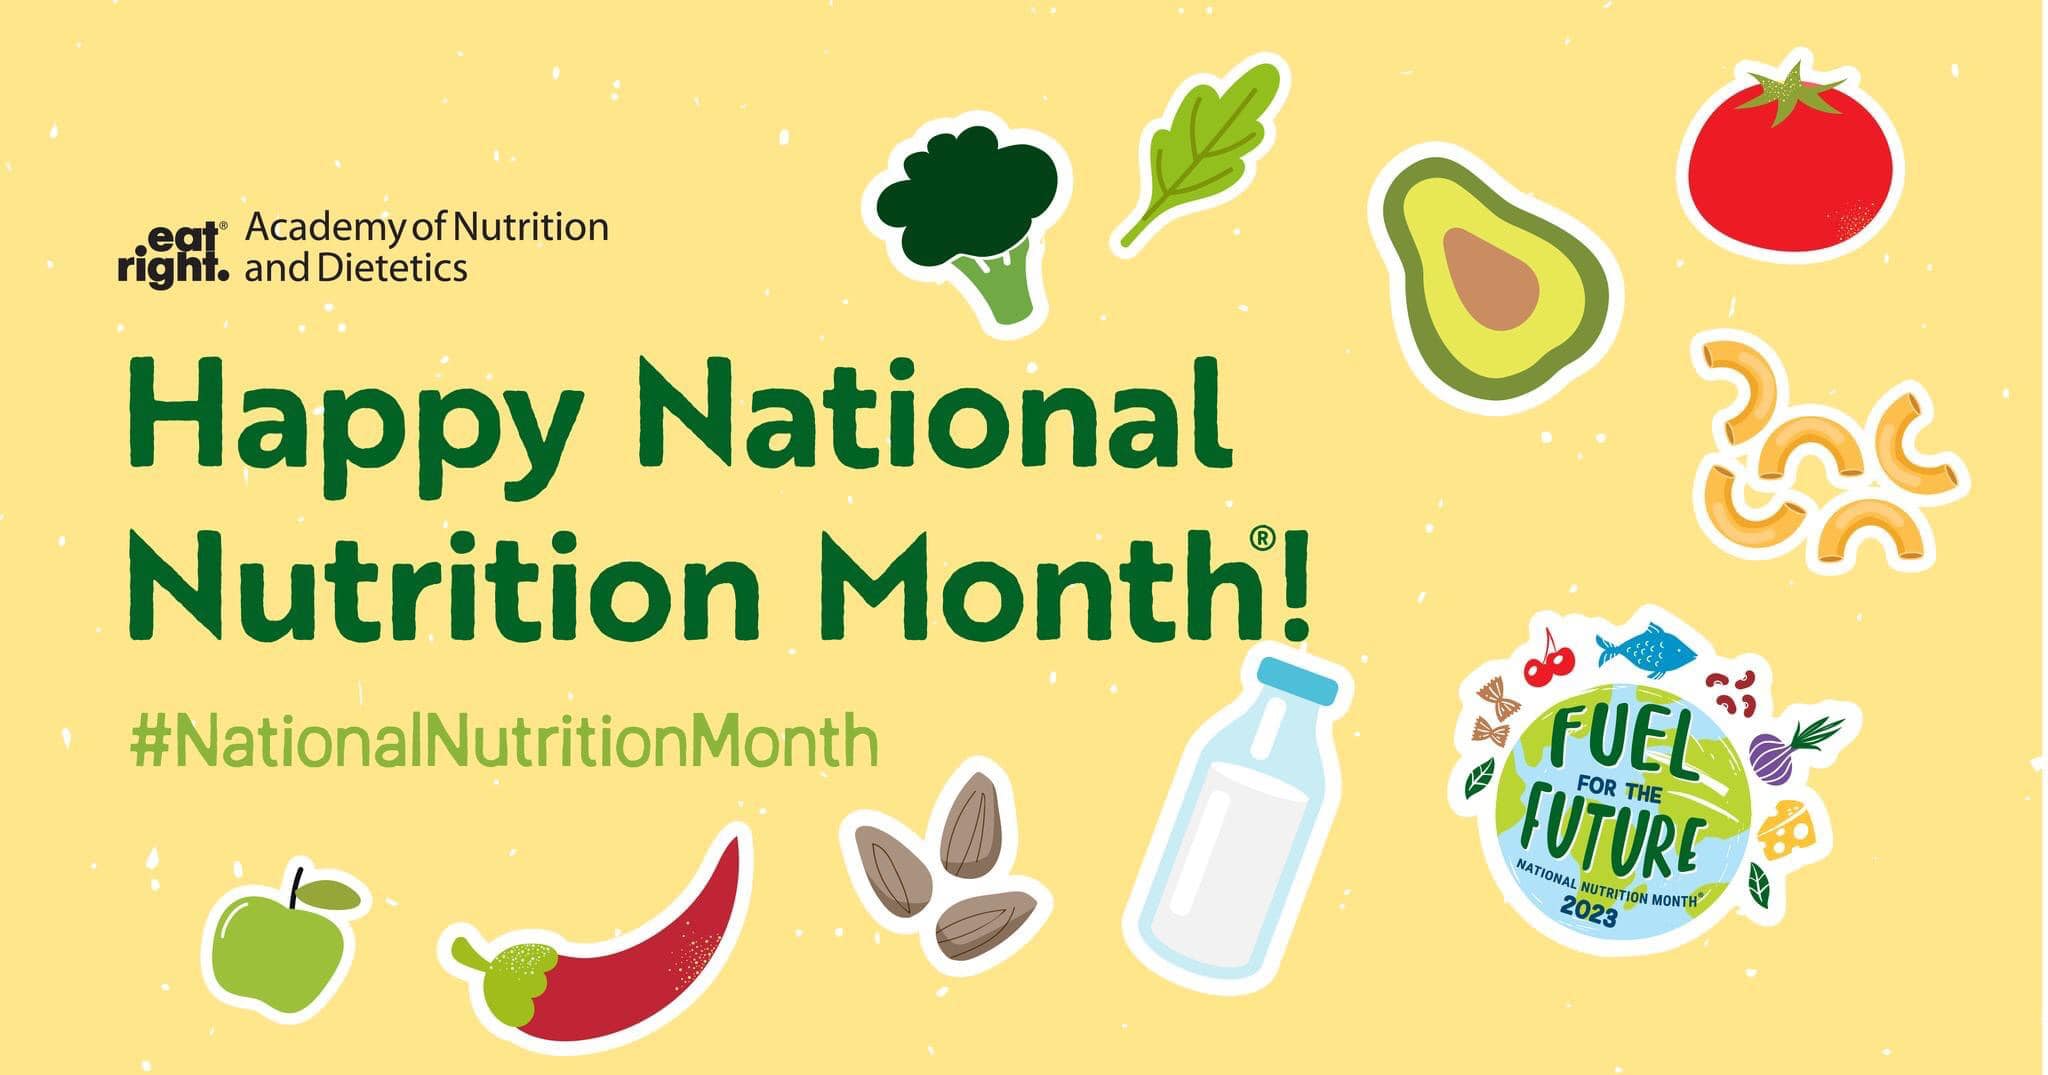 Celebrate National Nutrition Month